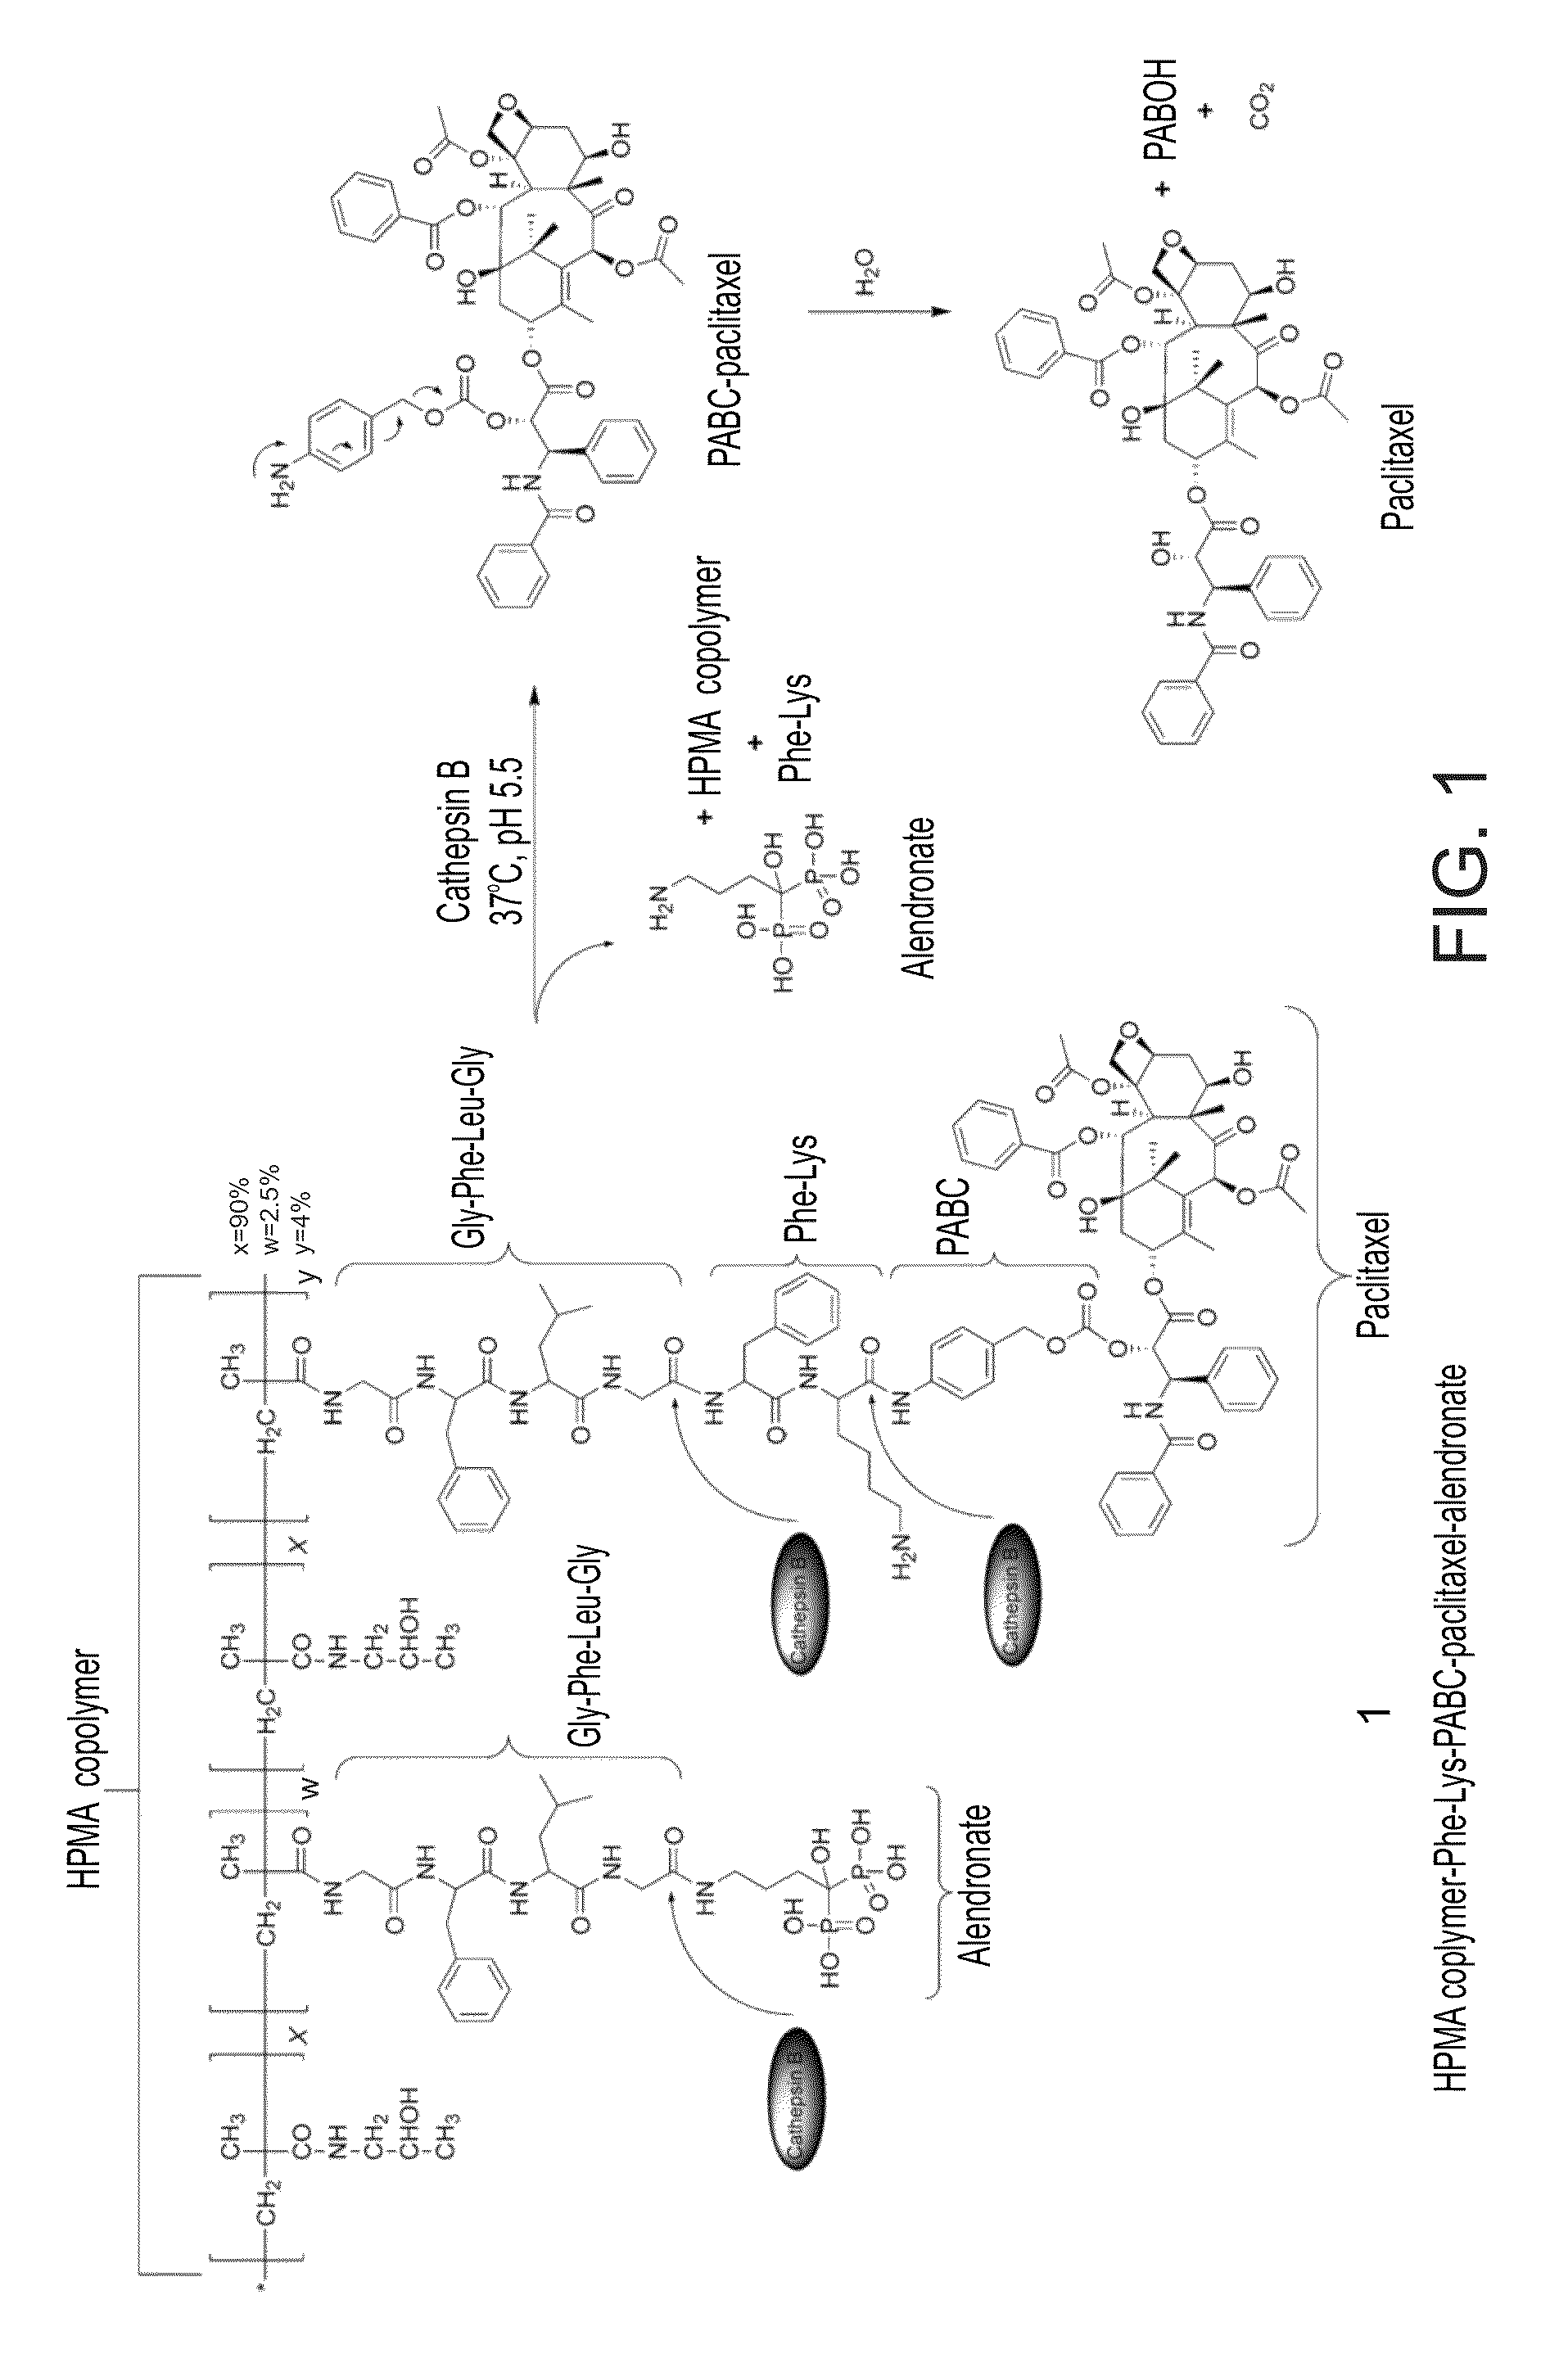 Conjugates of a polymer, a bisphosphonate and an anti-angiogenesis agent and uses thereof in the treatment and monitoring of bone related diseases